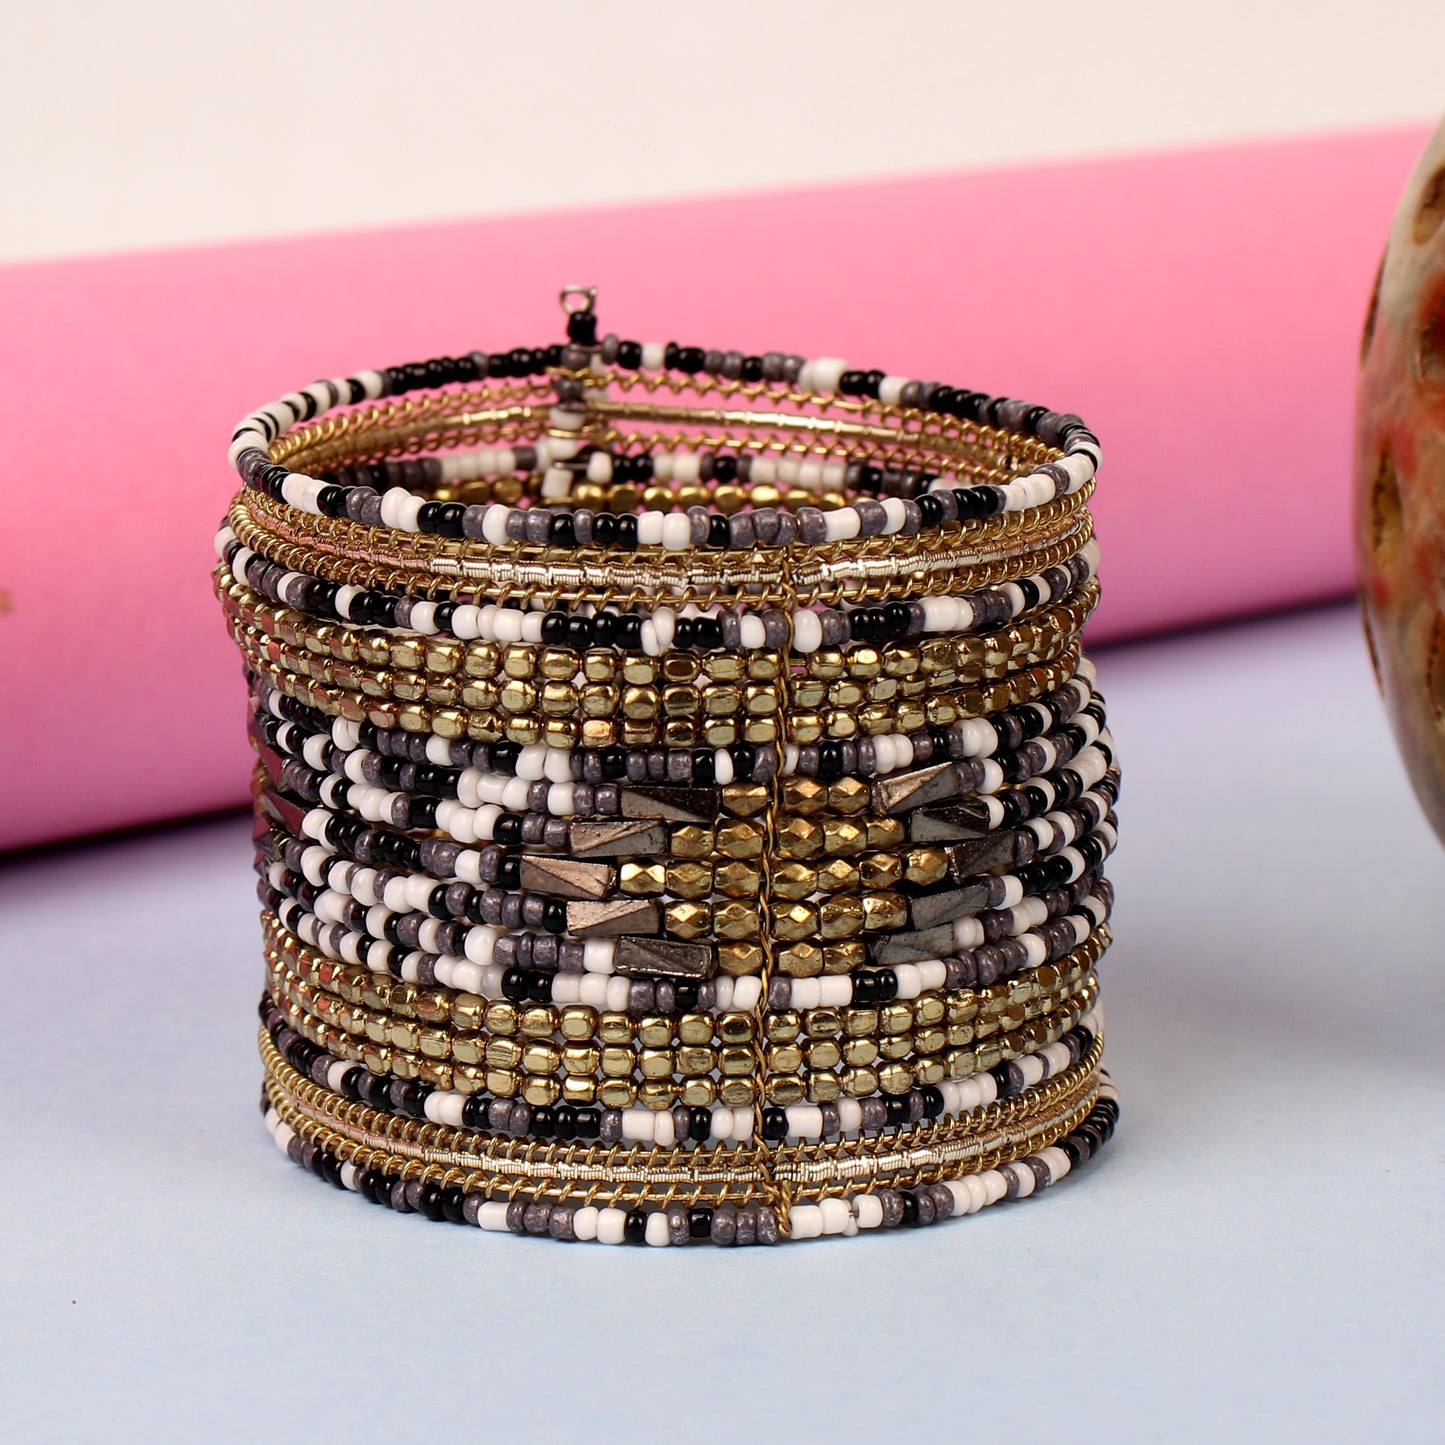 The Vivid Glowing Bangle in Shades of Black